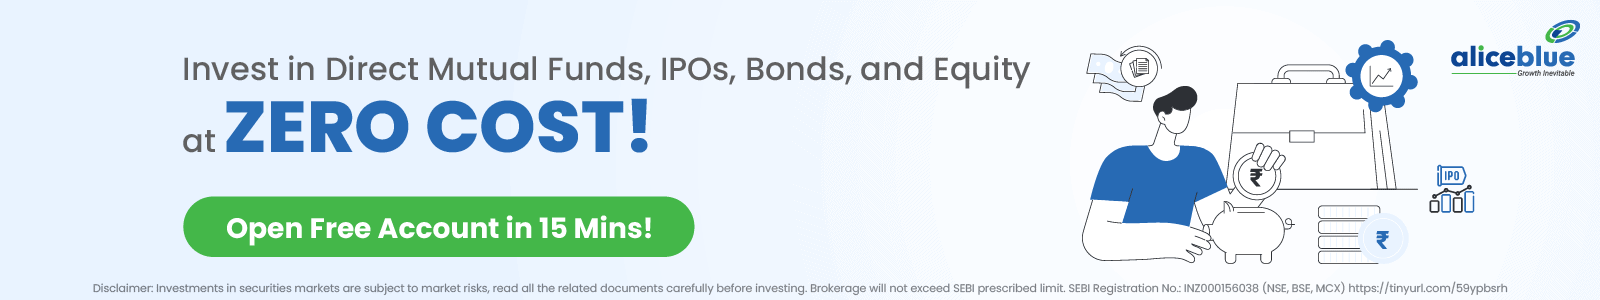 Invest in Direct Mutual Funds, IPOs, Bonds, and Equity at ZERO COST